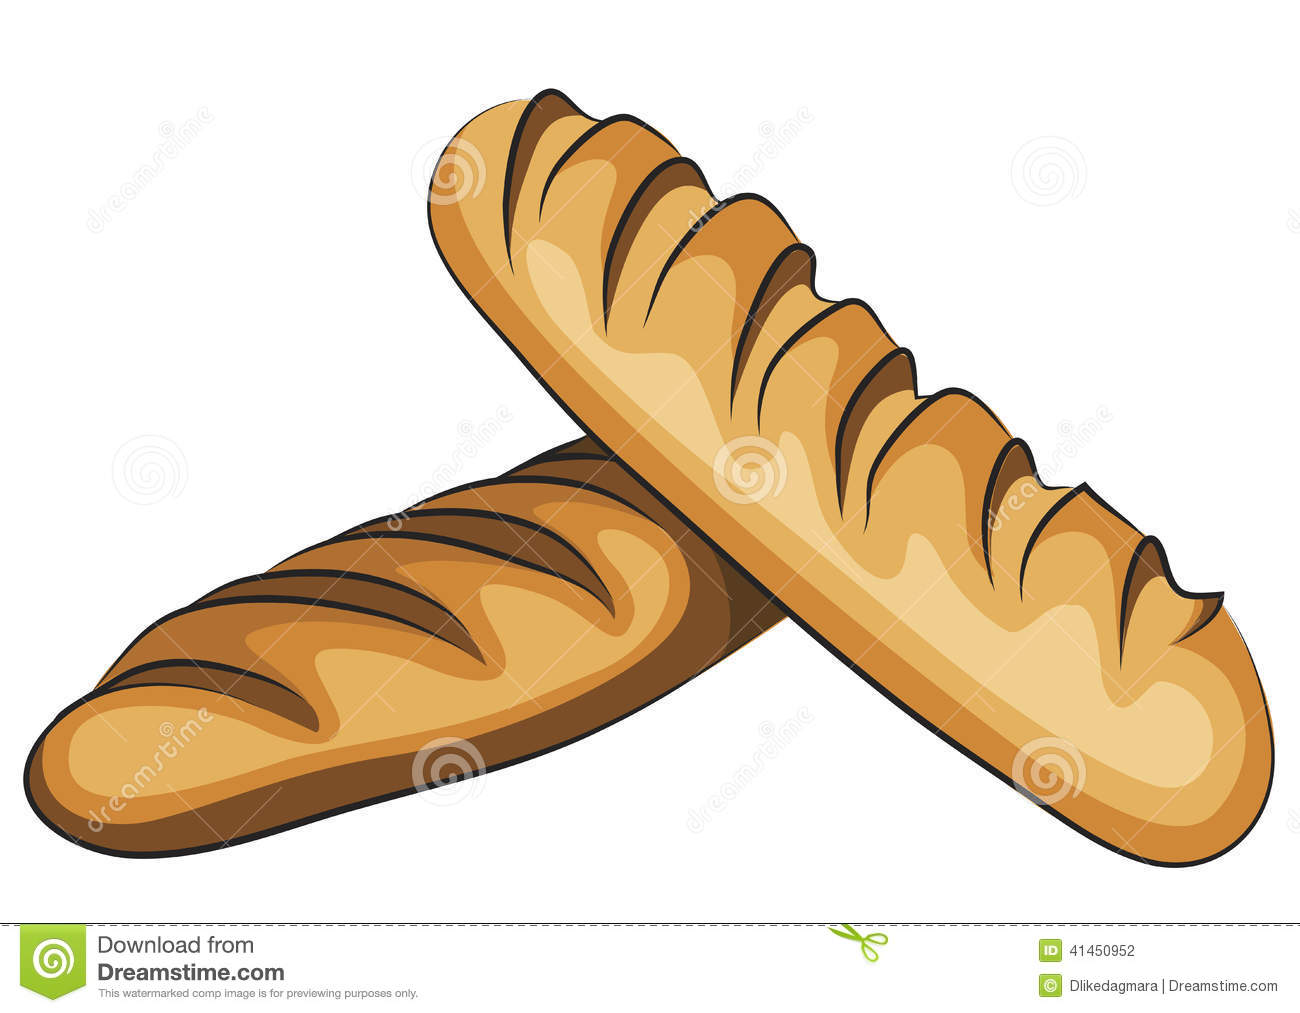 Baguette cliparts free download. France clipart bakery french